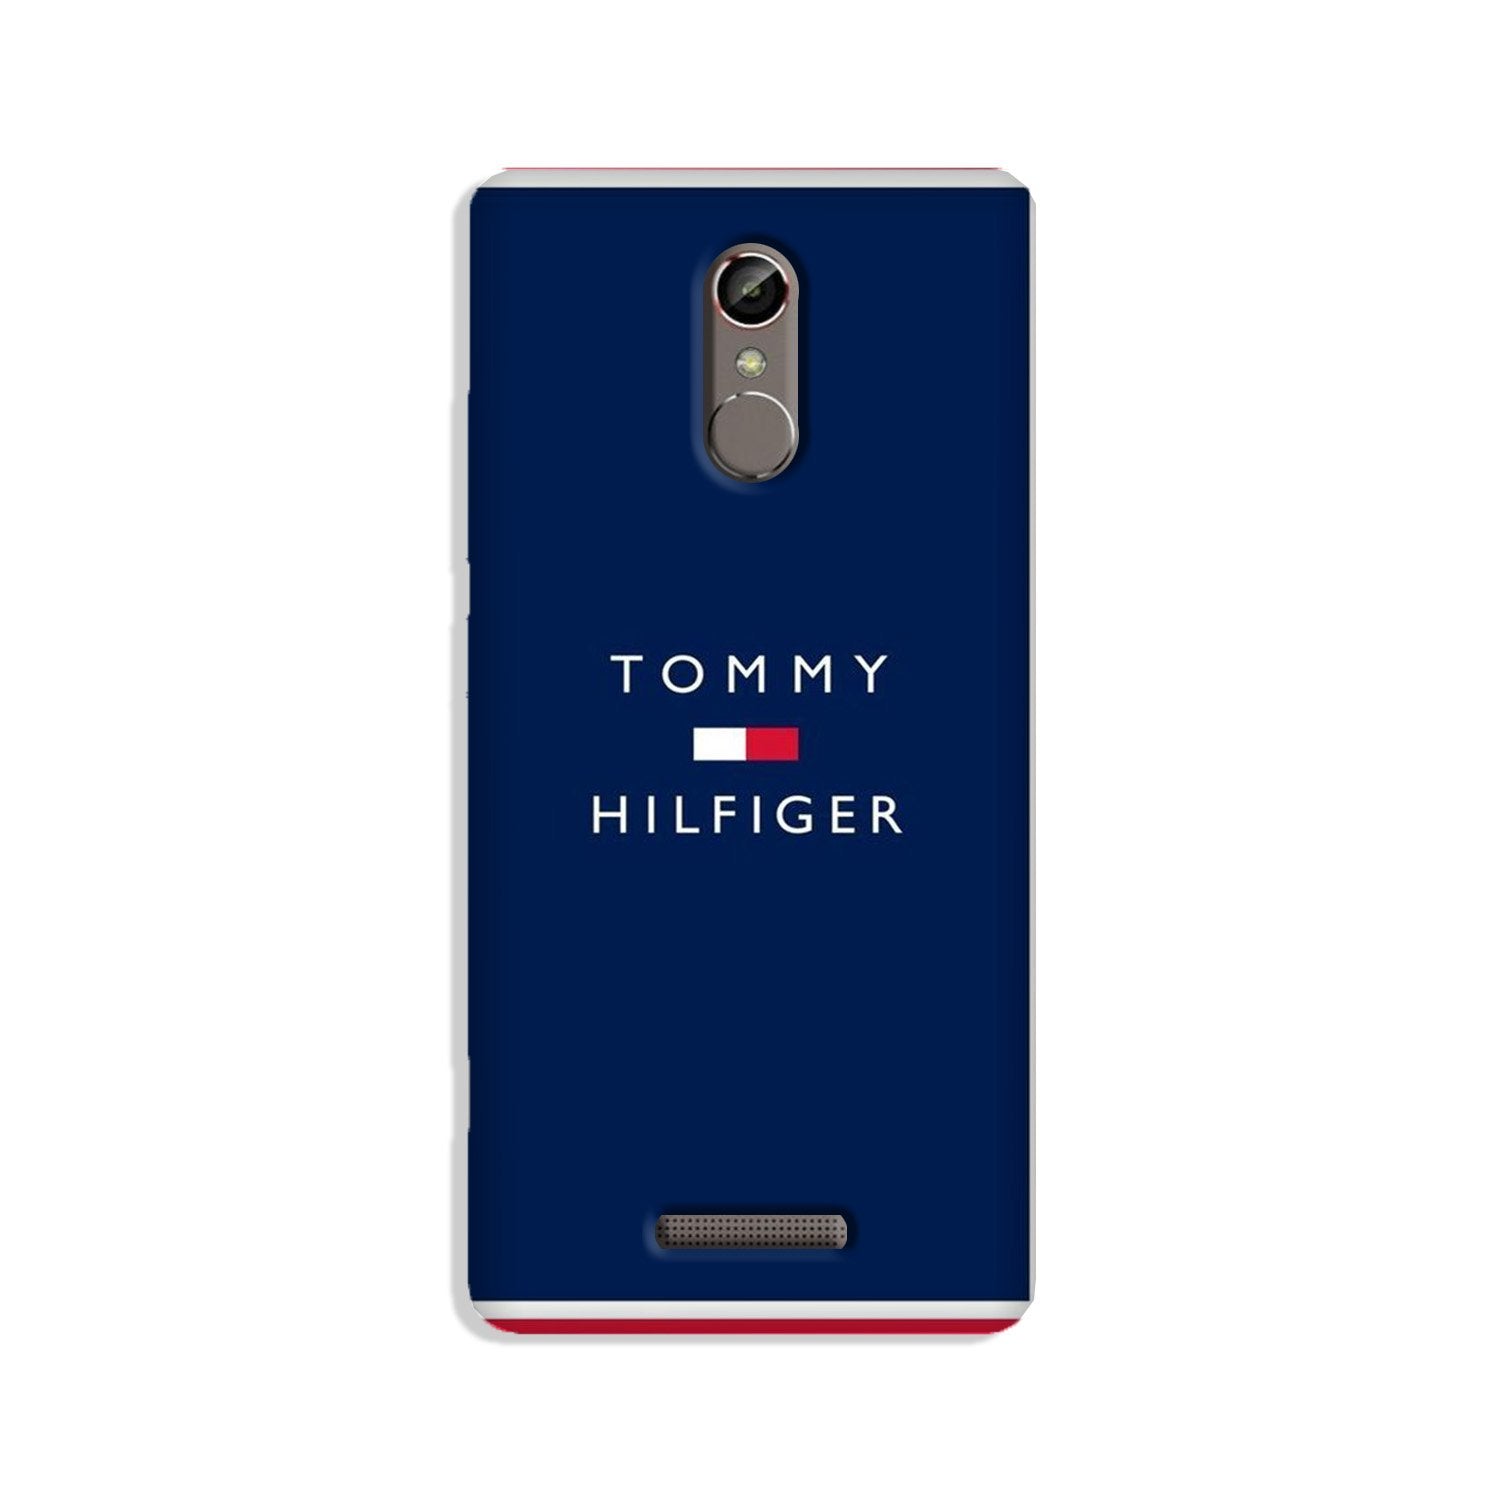 Tommy Hilfiger Case for Gionee S6s (Design No. 275)